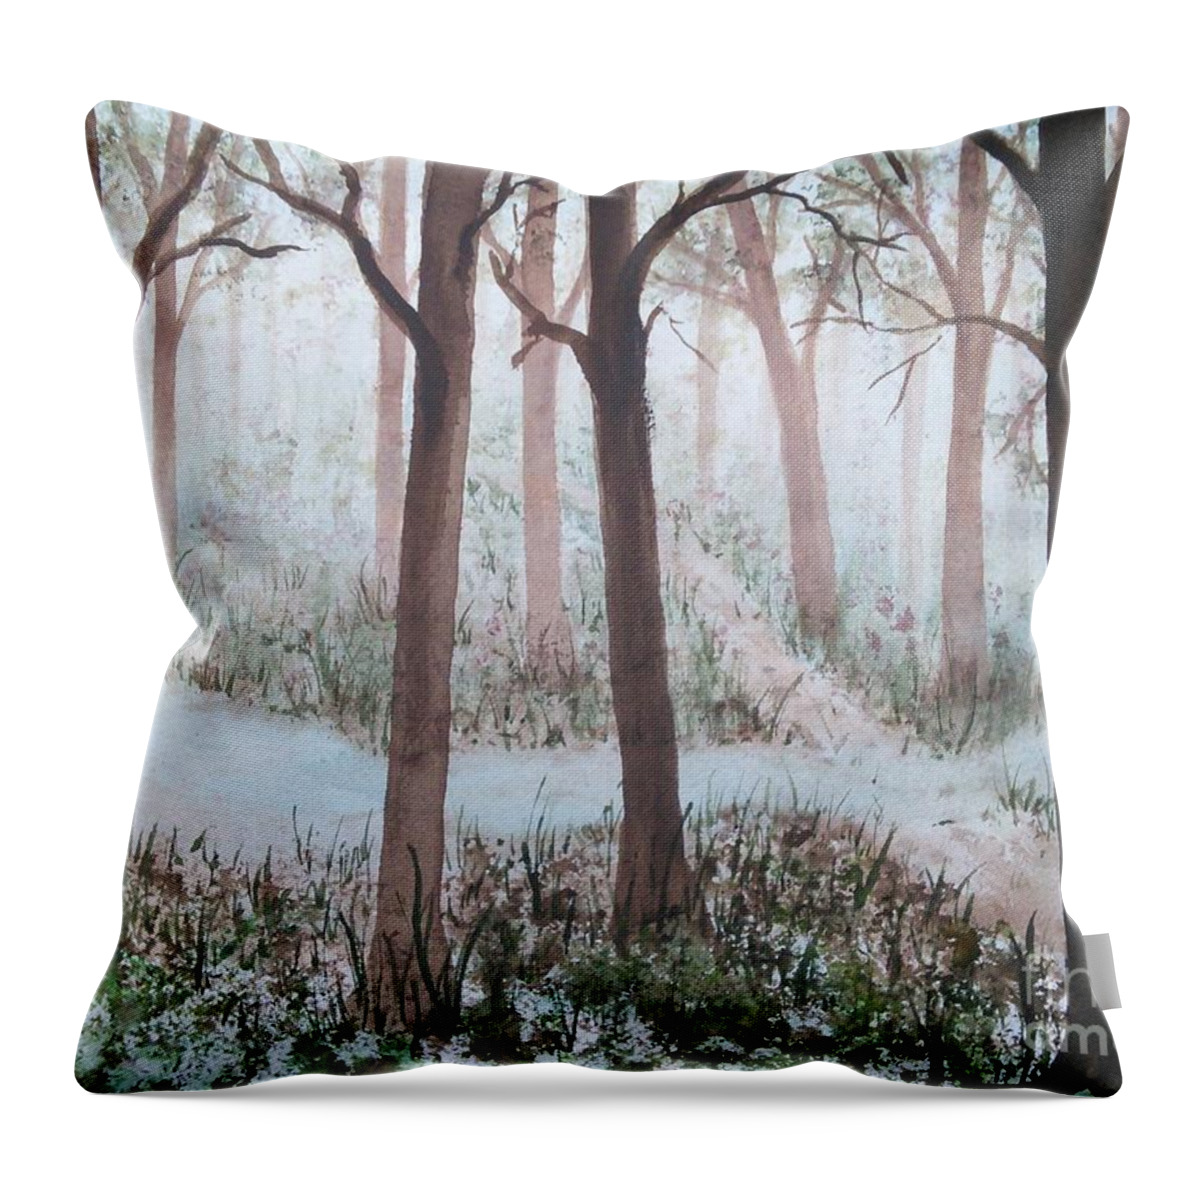 Stream Crossing Path Throw Pillow featuring the painting Different Paths by Susan Nielsen